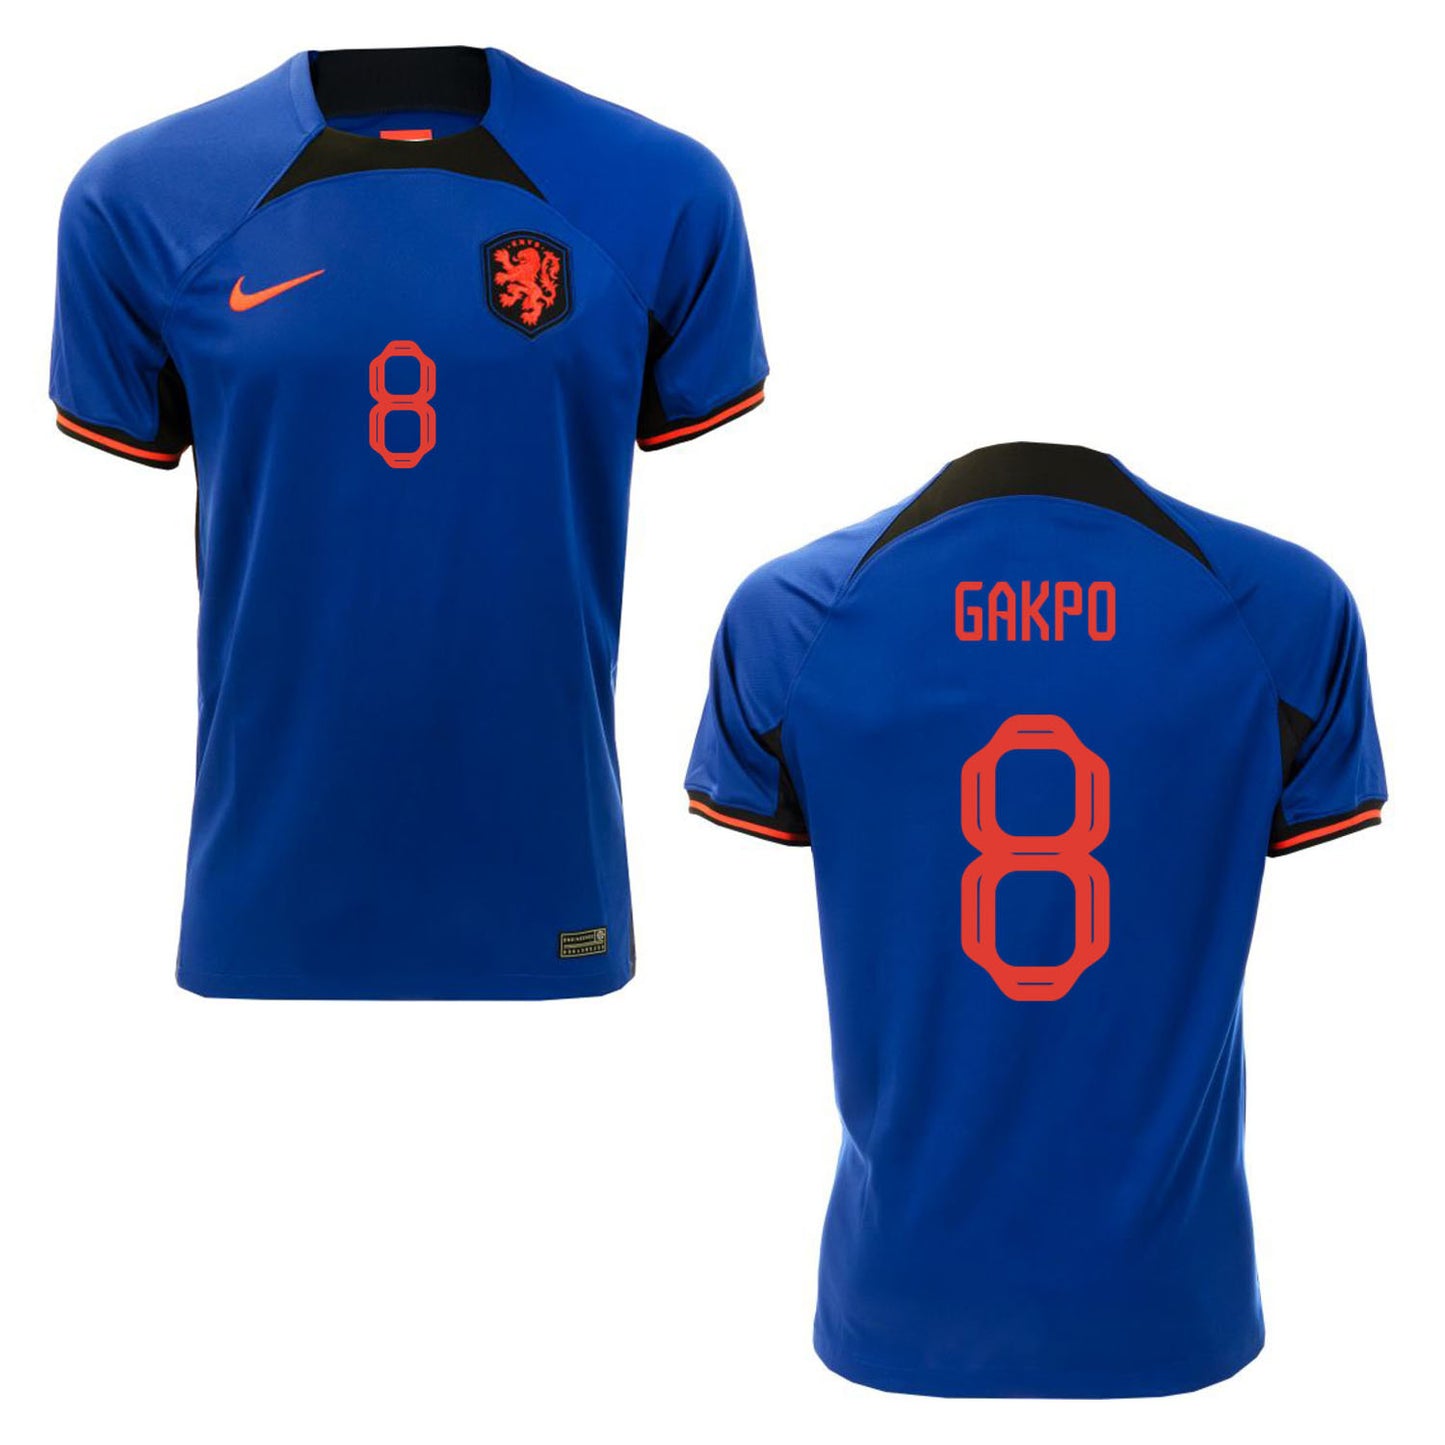 Gakpo Netherlands 8 FIFA World Cup Jersey